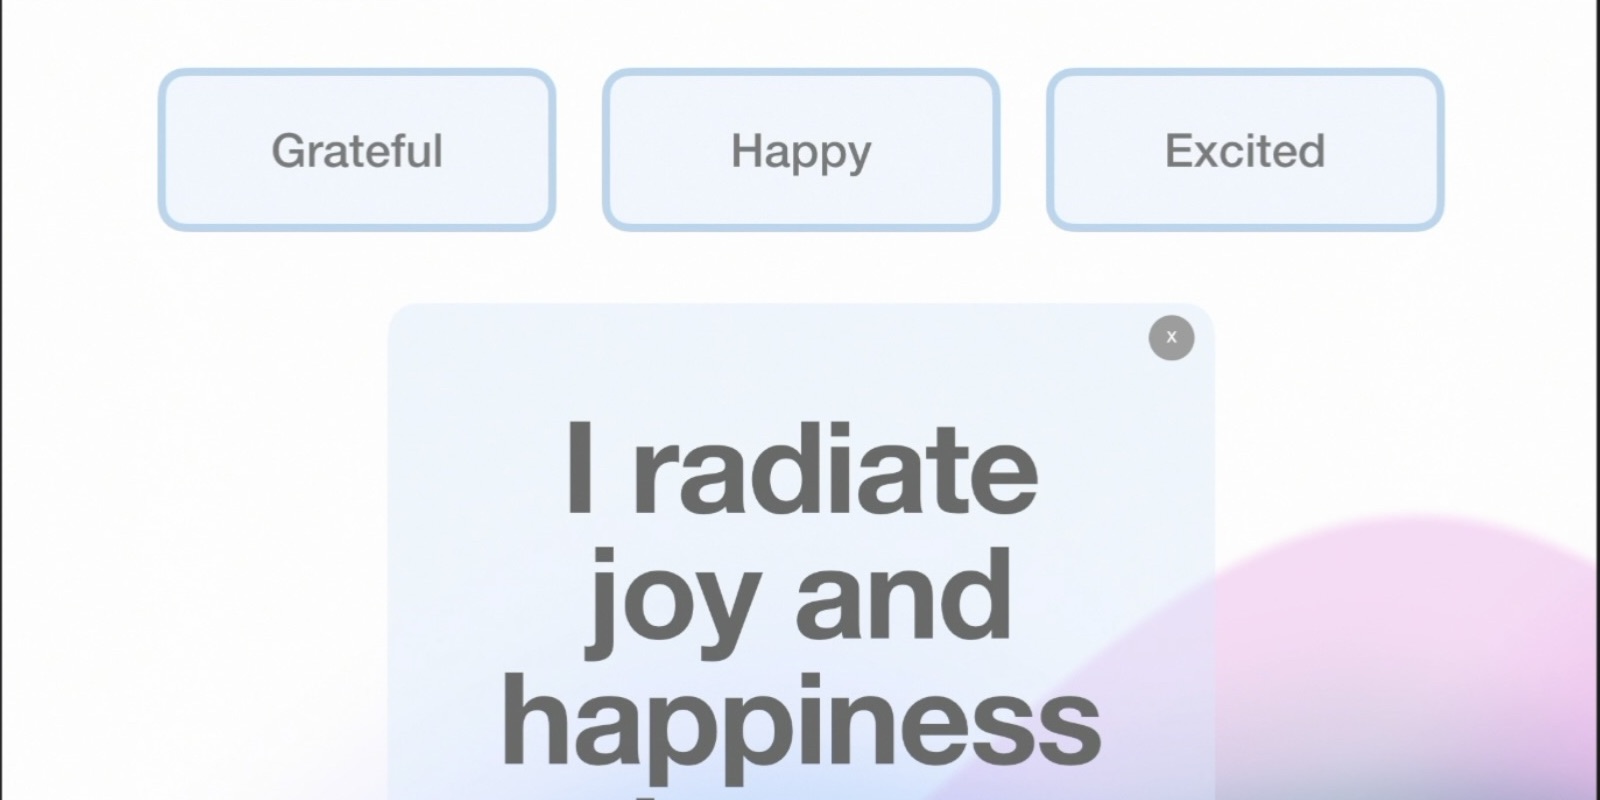 Image of a simple app with affirmations.